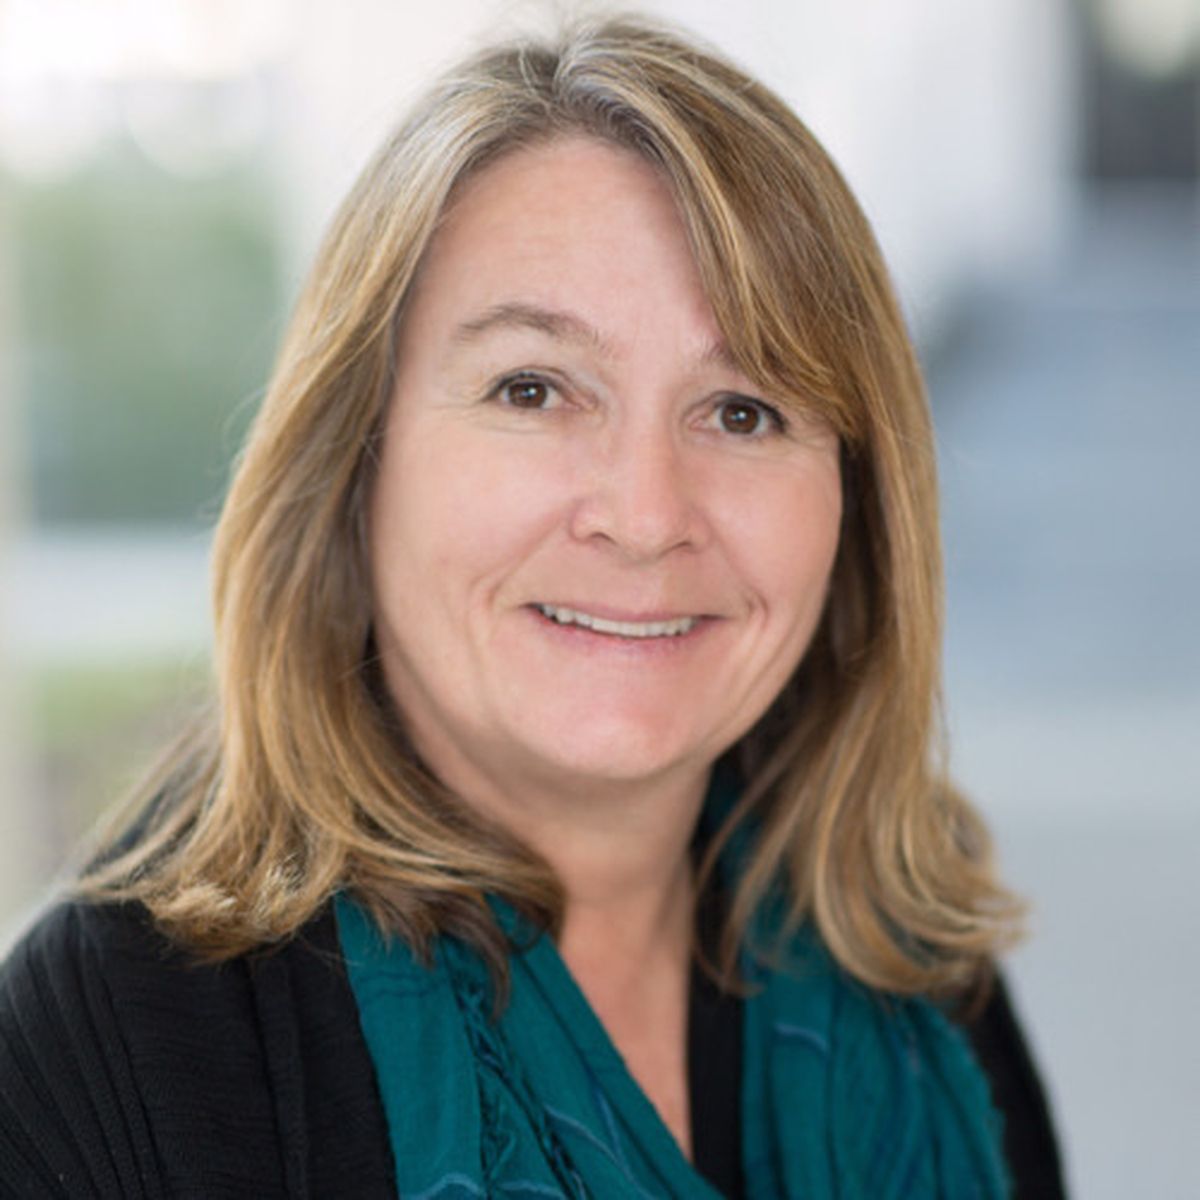 LinkedIn: Jane Wasson, director of product marketing, Area 1 Security